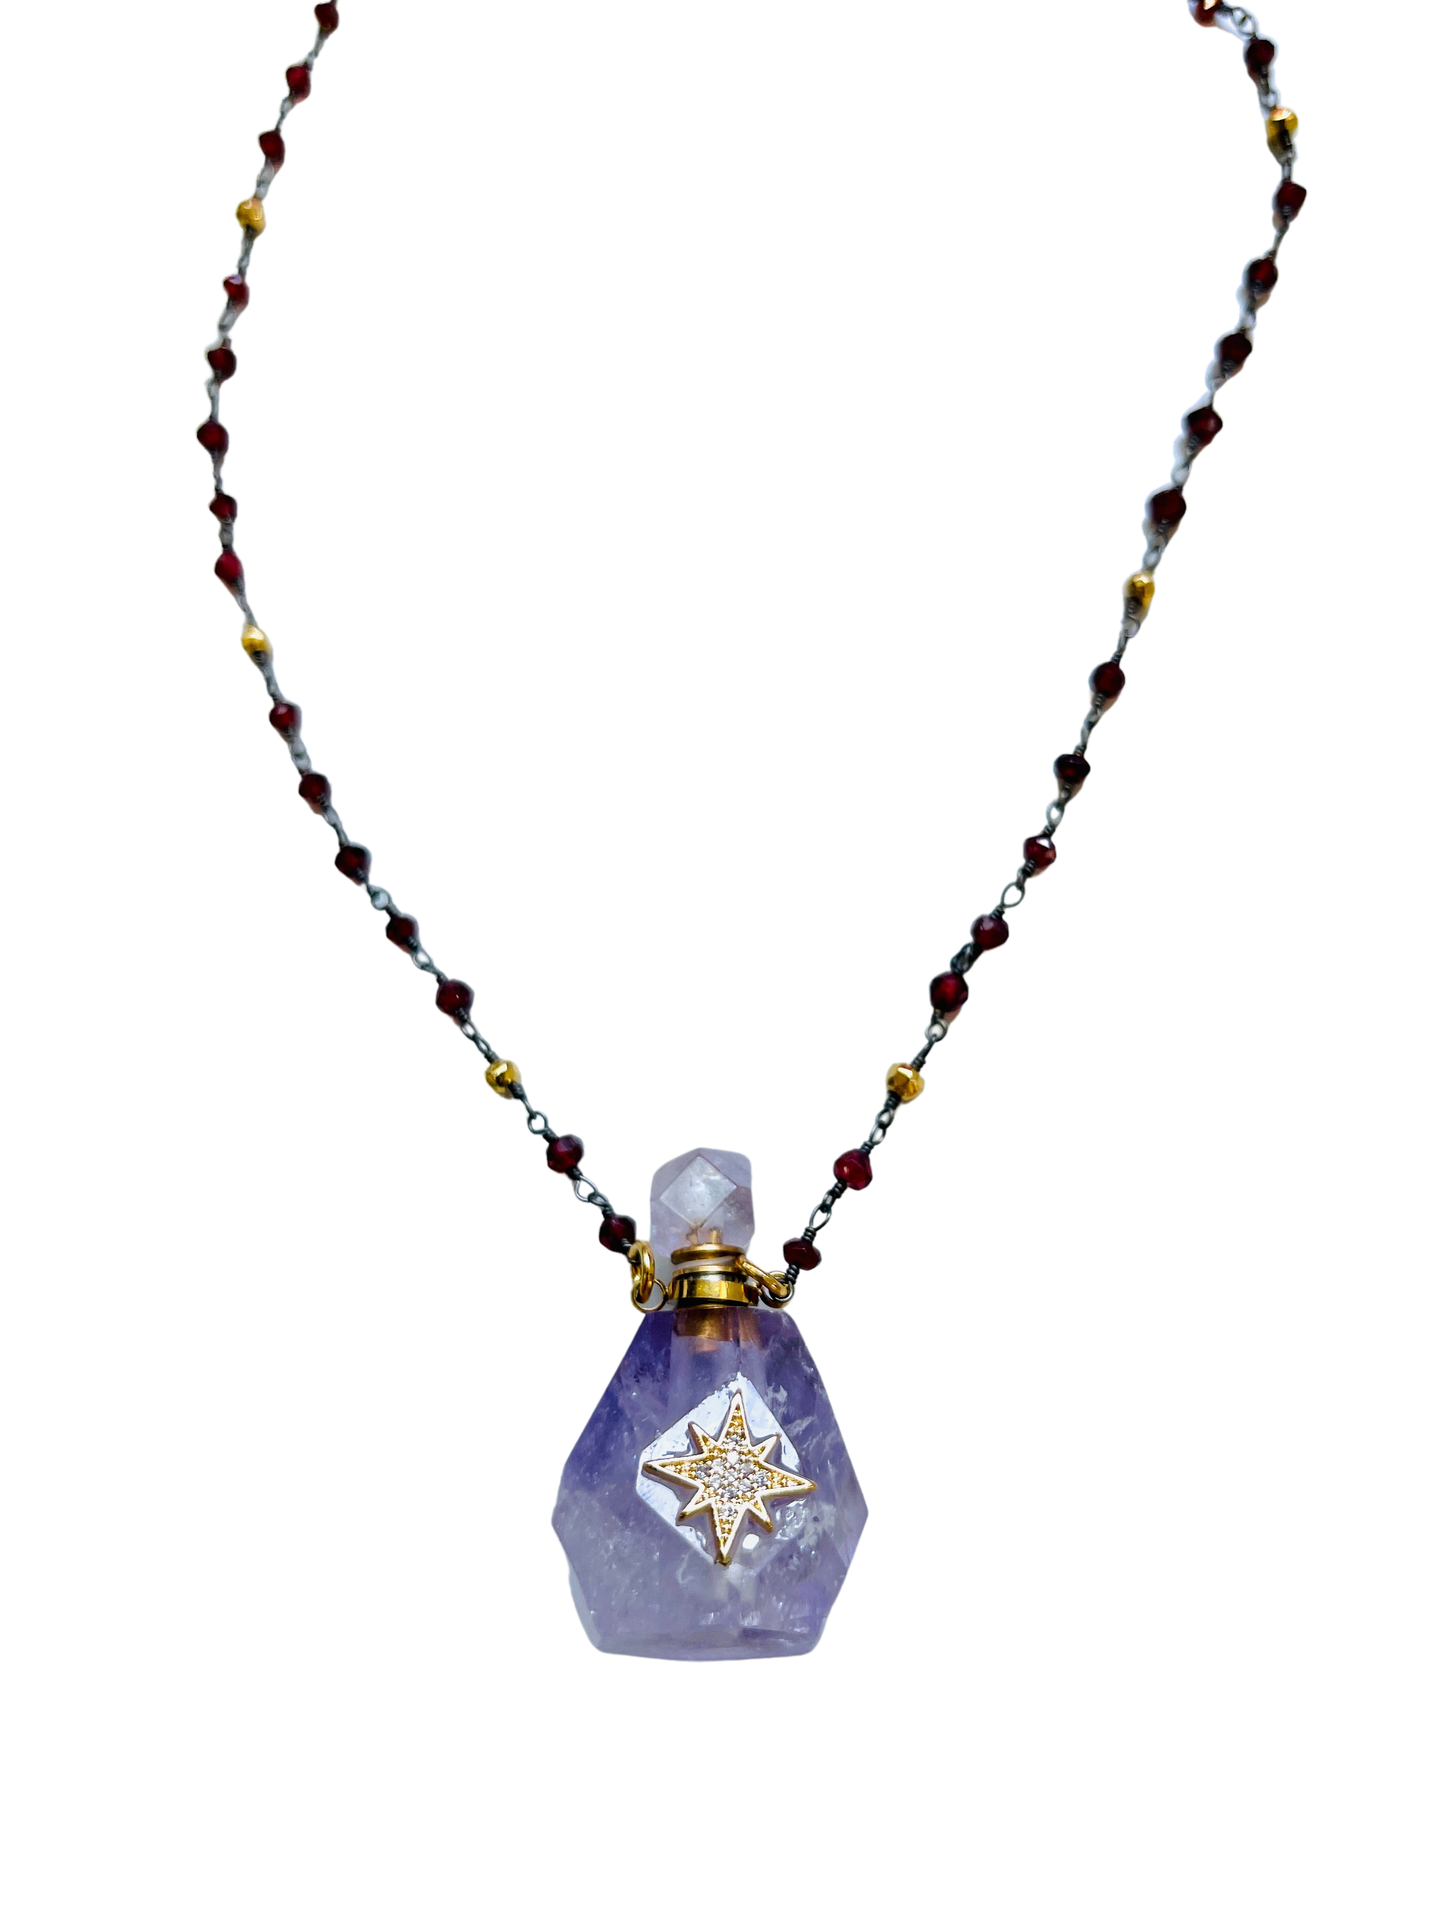 Amethyst with Star Accent  Carved Perfume Bottle Essential Oil Necklace